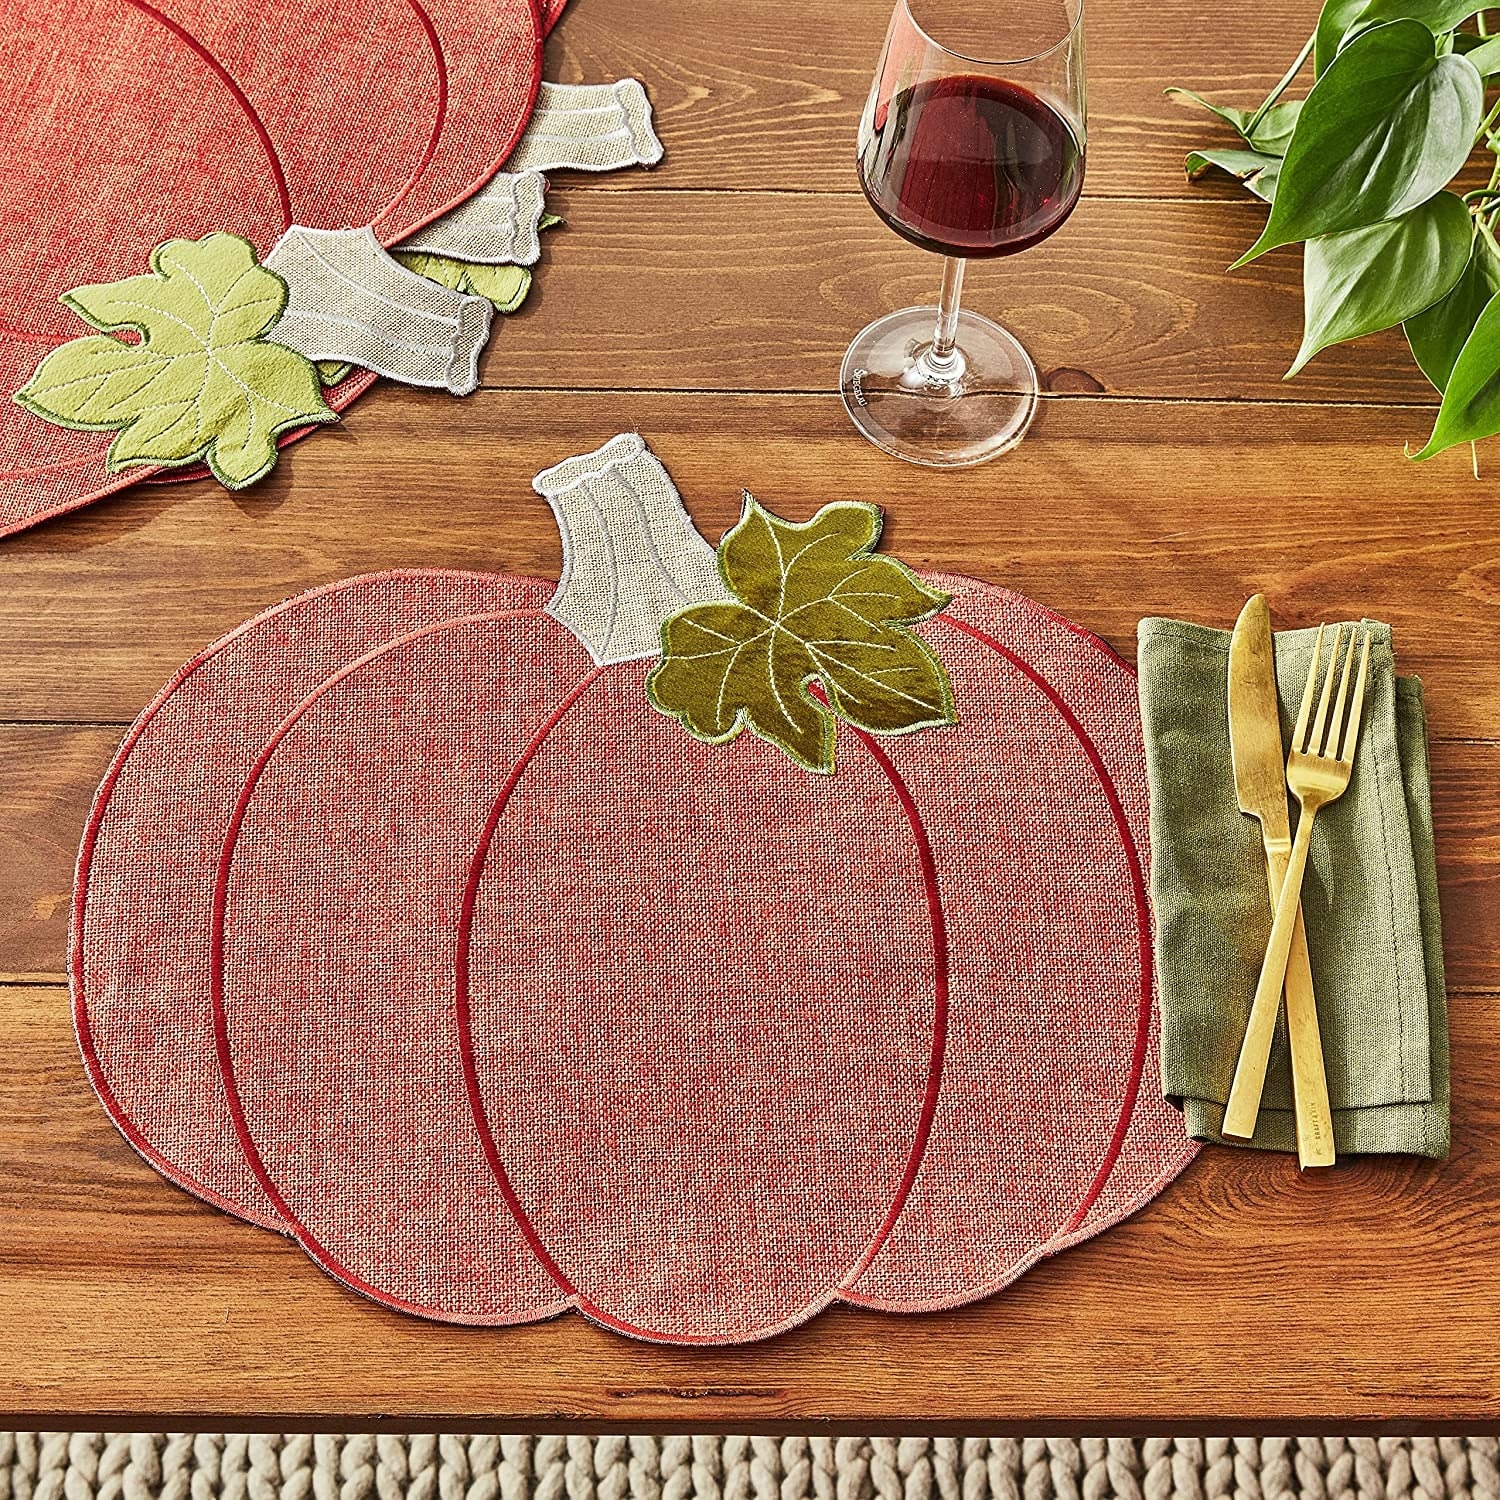 Set of 2 Vinyl Non Clear Placemats (18x12) 3 WINE BOTTLES & 4 WINE  LABELS, BH